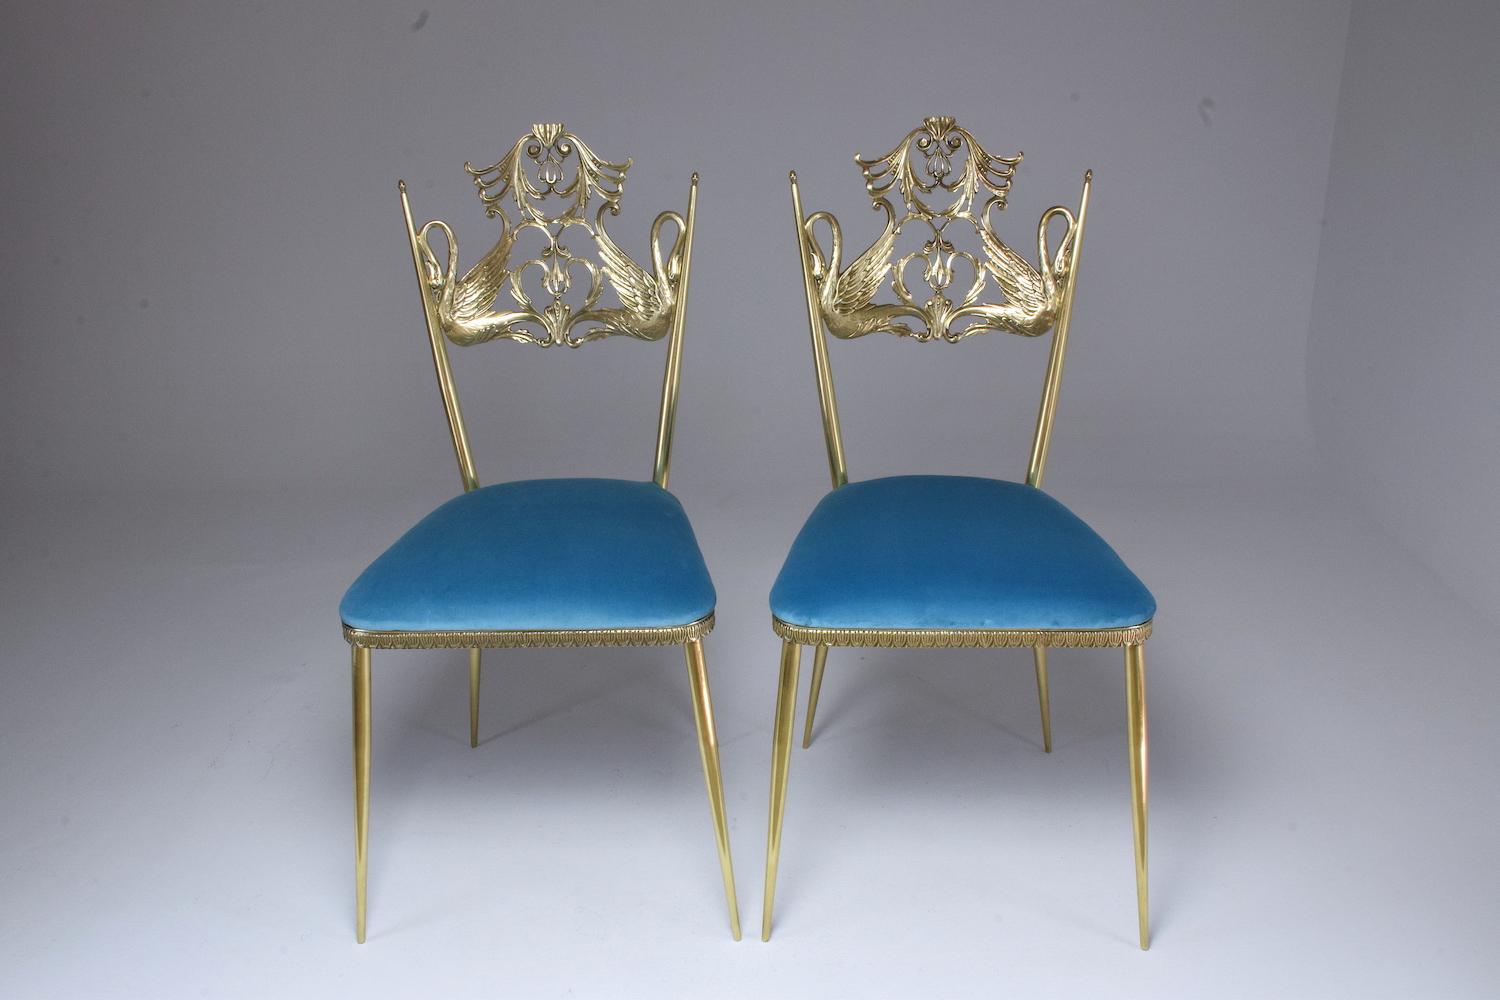 Very beautiful and original mid-century accent or side statement chairs designed in a solid gold brass structure with two swan birds in fully restored condition through careful polishing, new foam padding, and light blue reupholstered velvet